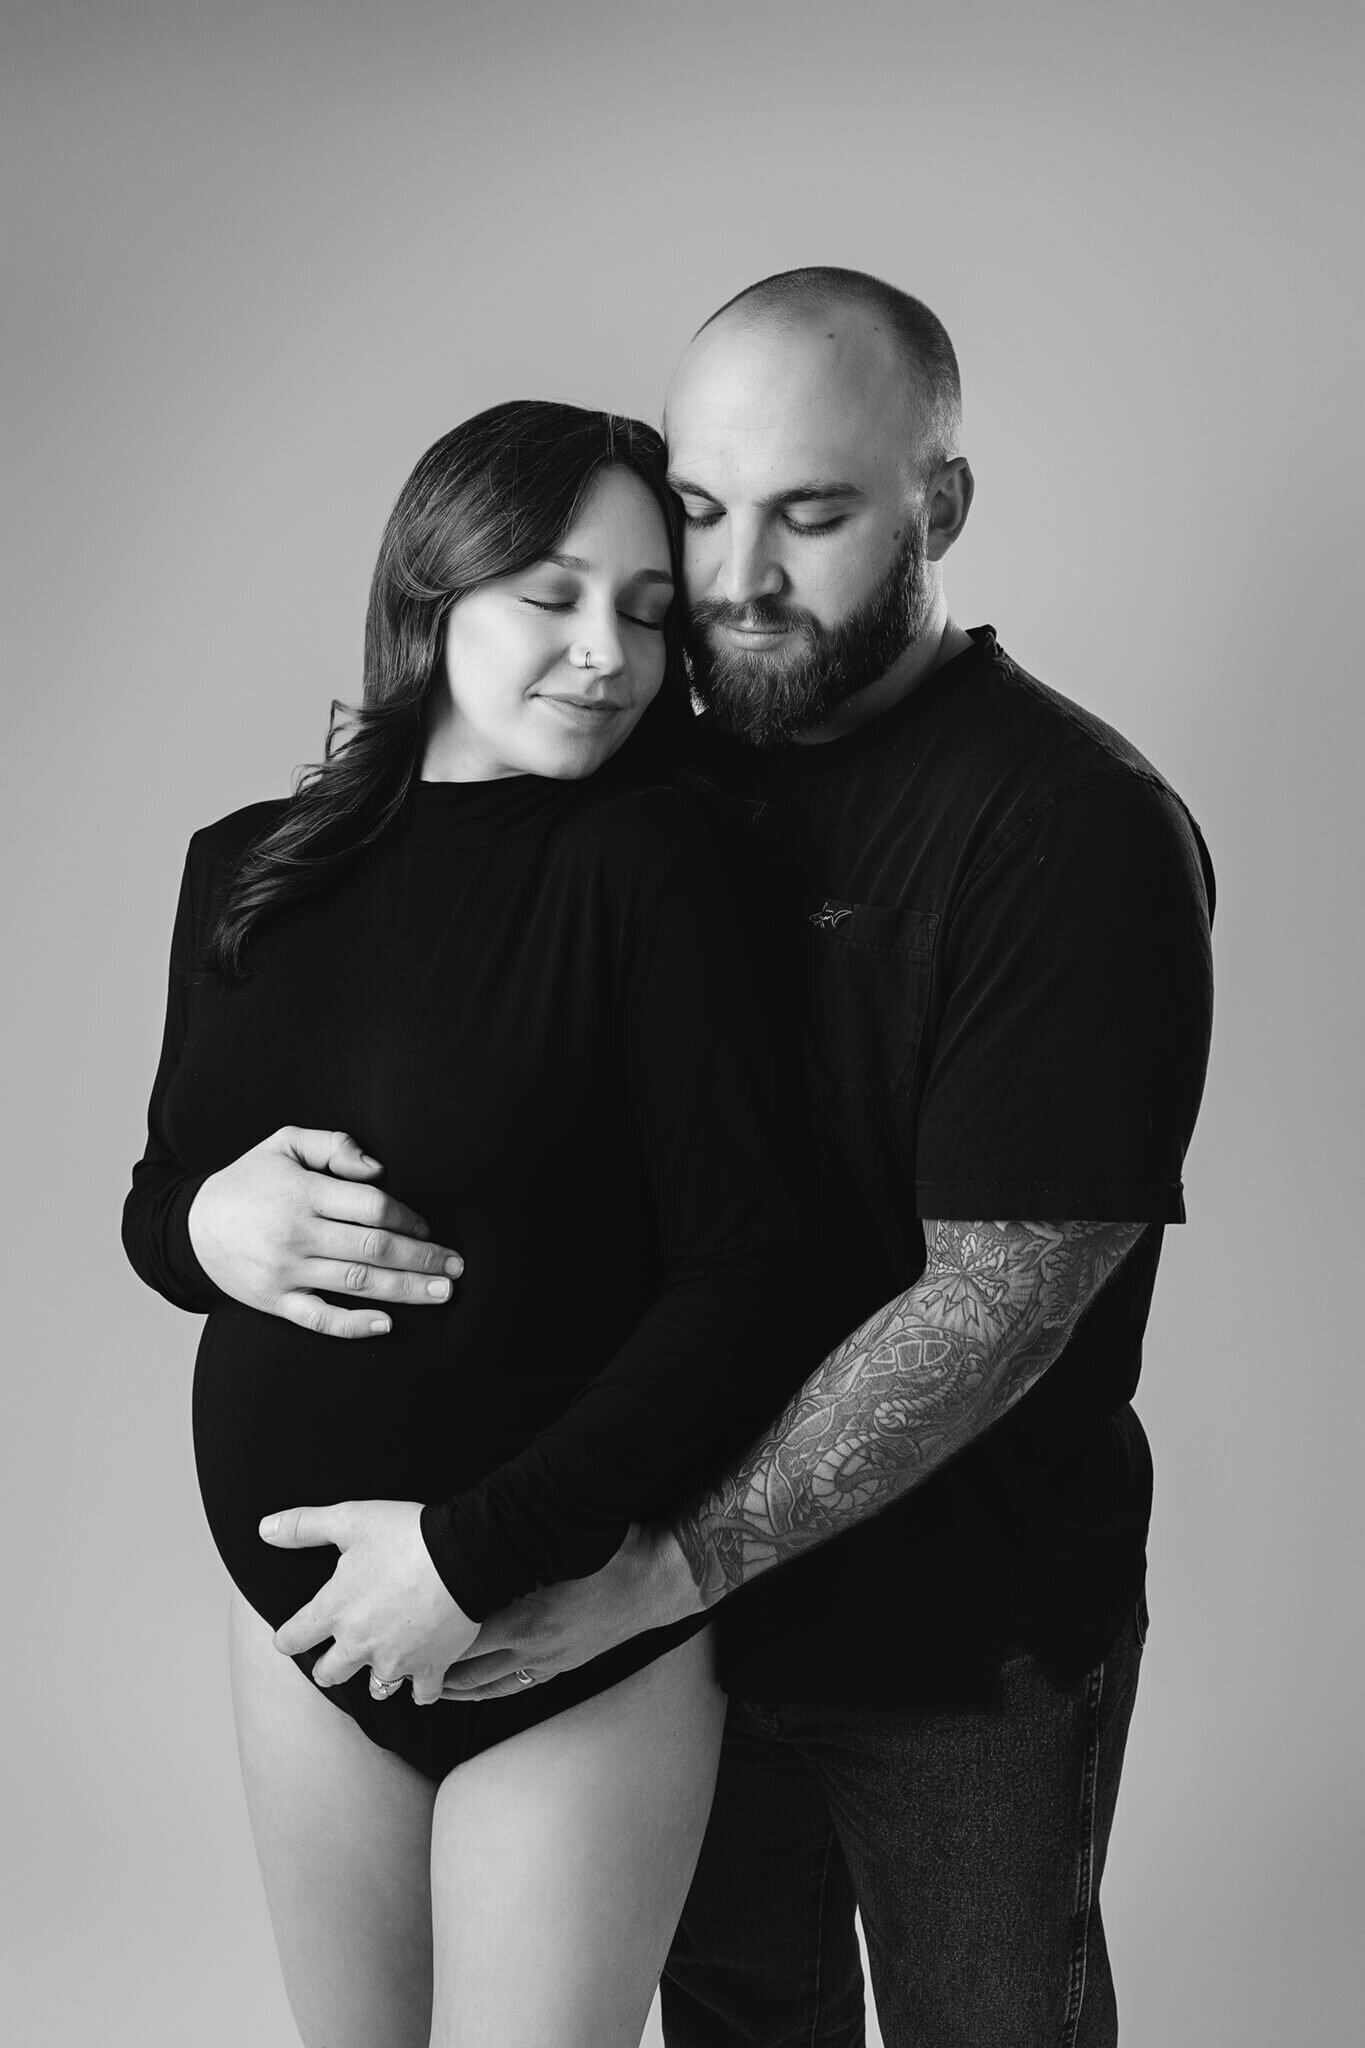 expecting couple are hugging each other and touching her belly in a soft and romantic way for their maternity photoshoot